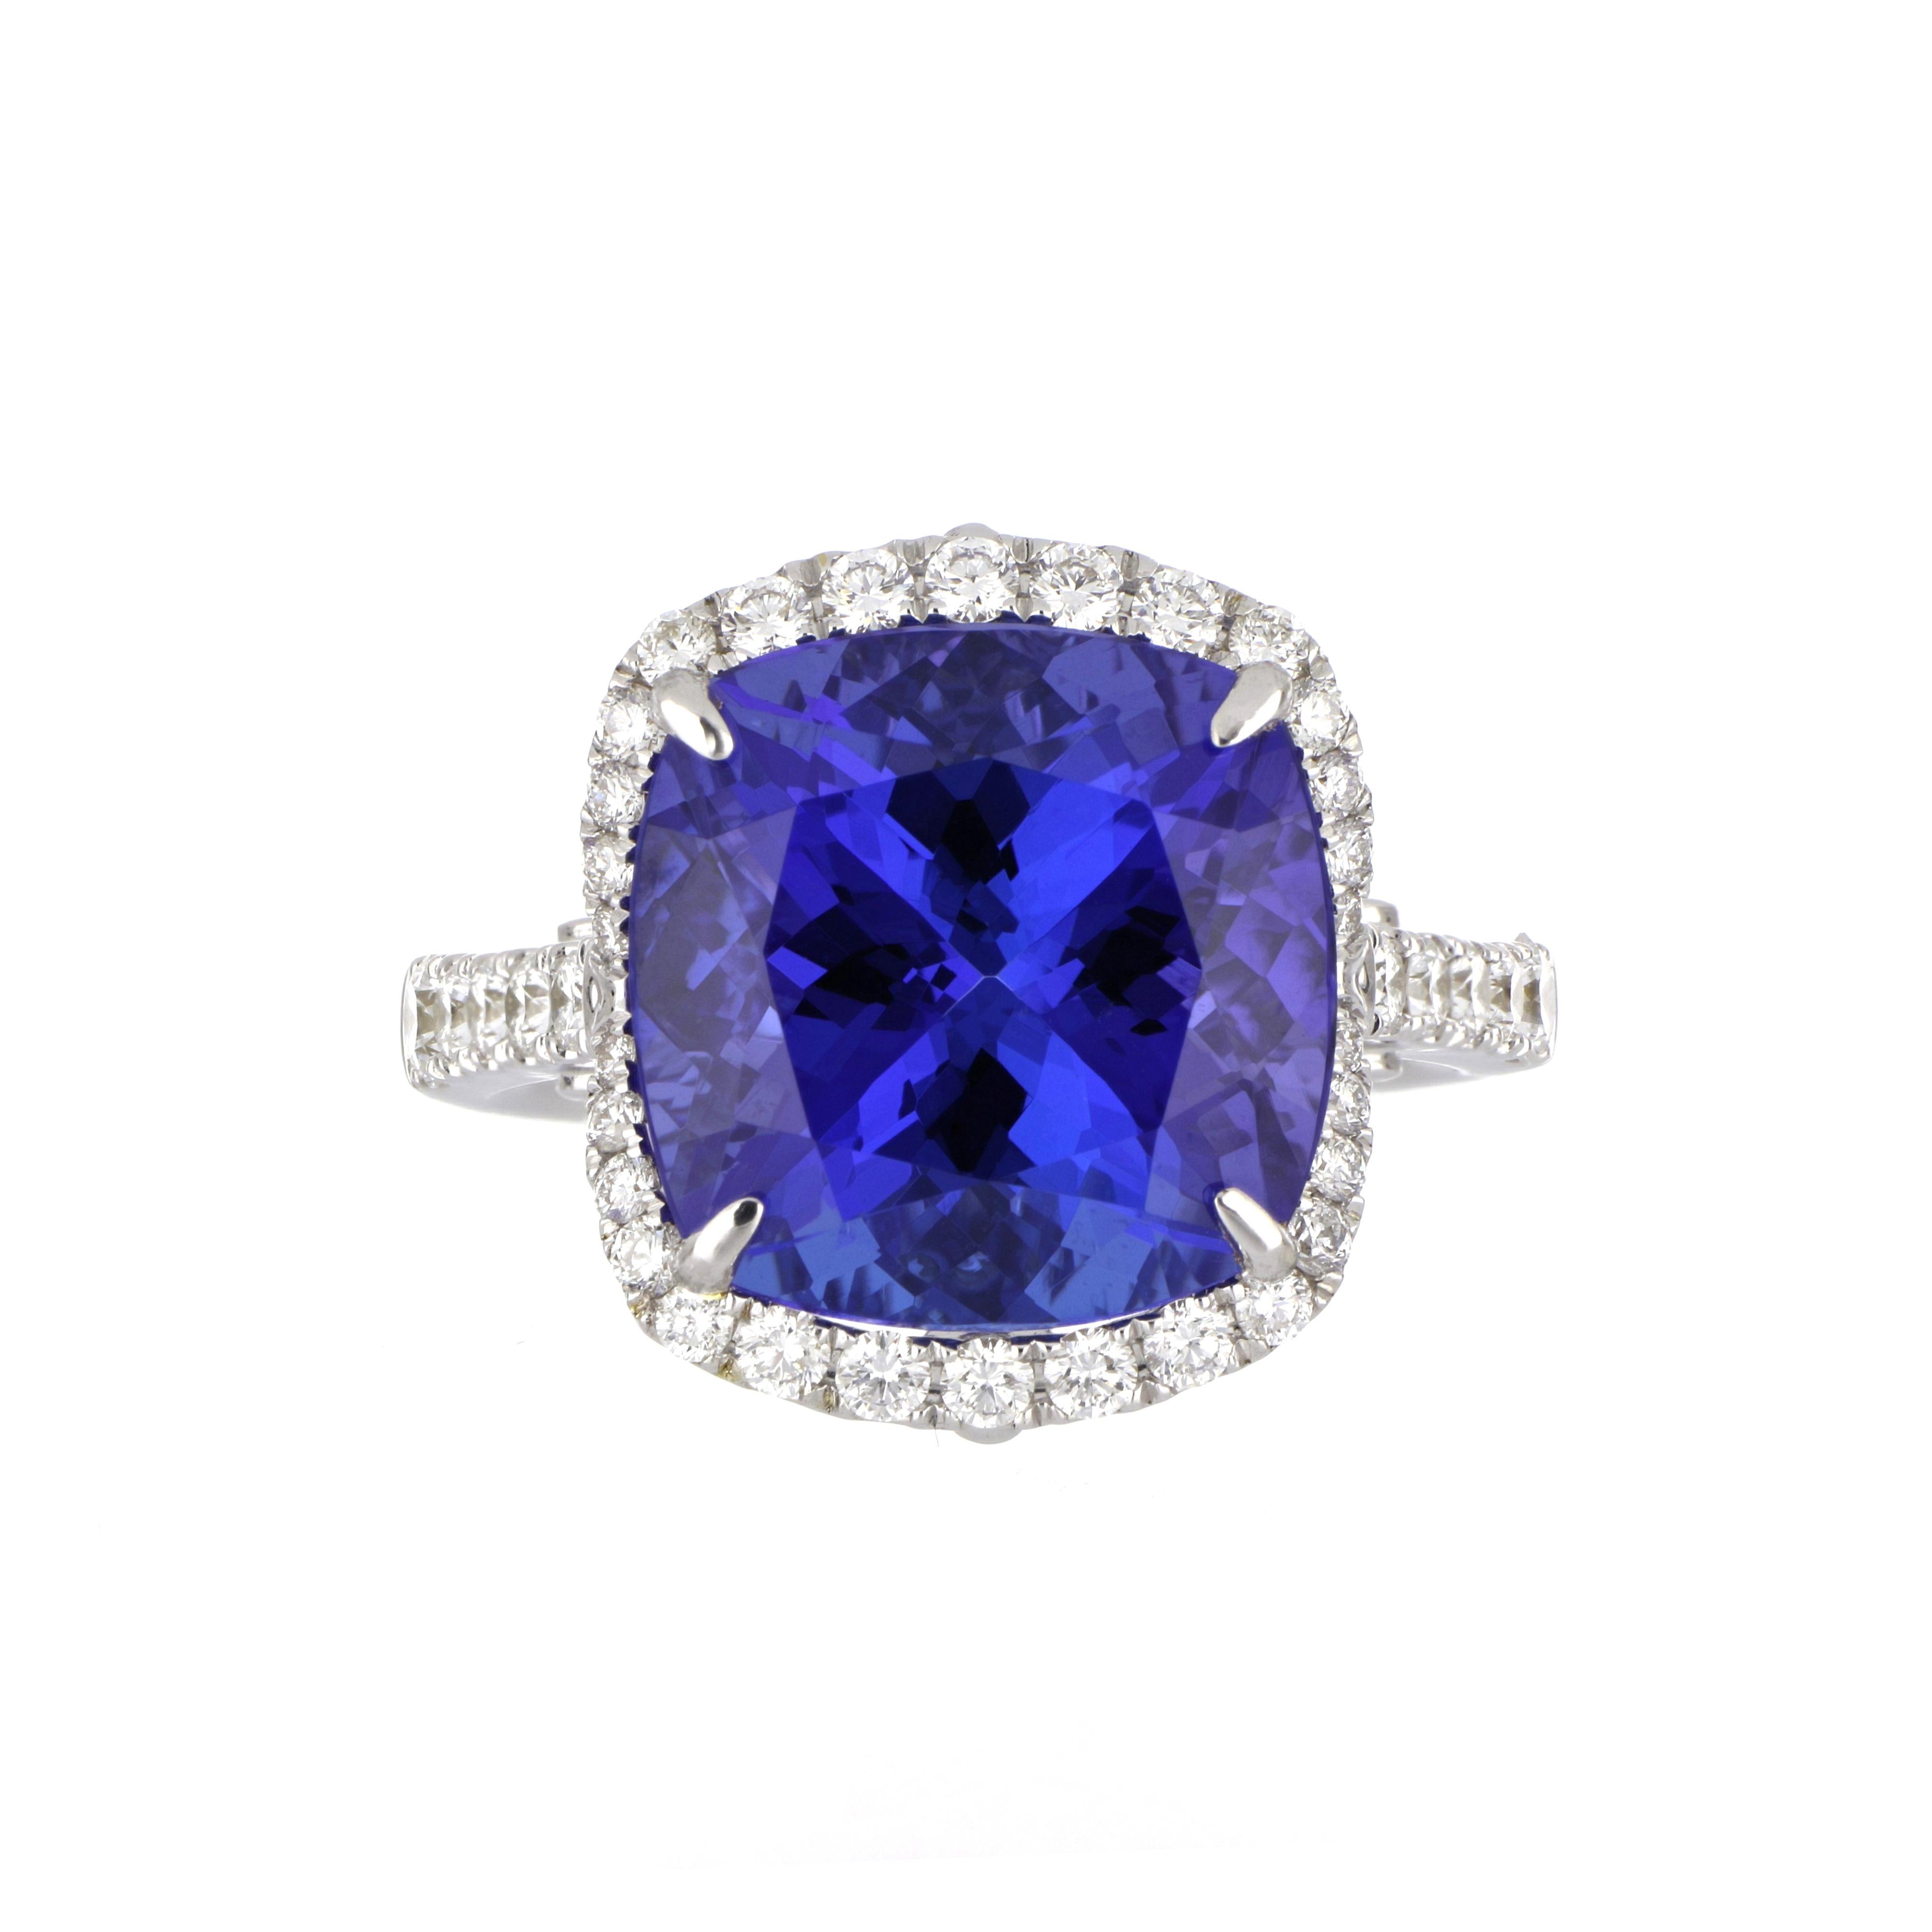 Elegant and exquisitely detailed 18K Ring, centre set with 10.80 Ct Tanzanite, surrounded by and enhanced on shank with micro pave Diamonds, weighing approx. 1.02 total carat weight. Beautifully Hand crafted in 18 Karat white Gold.

Stone Size: 13.1